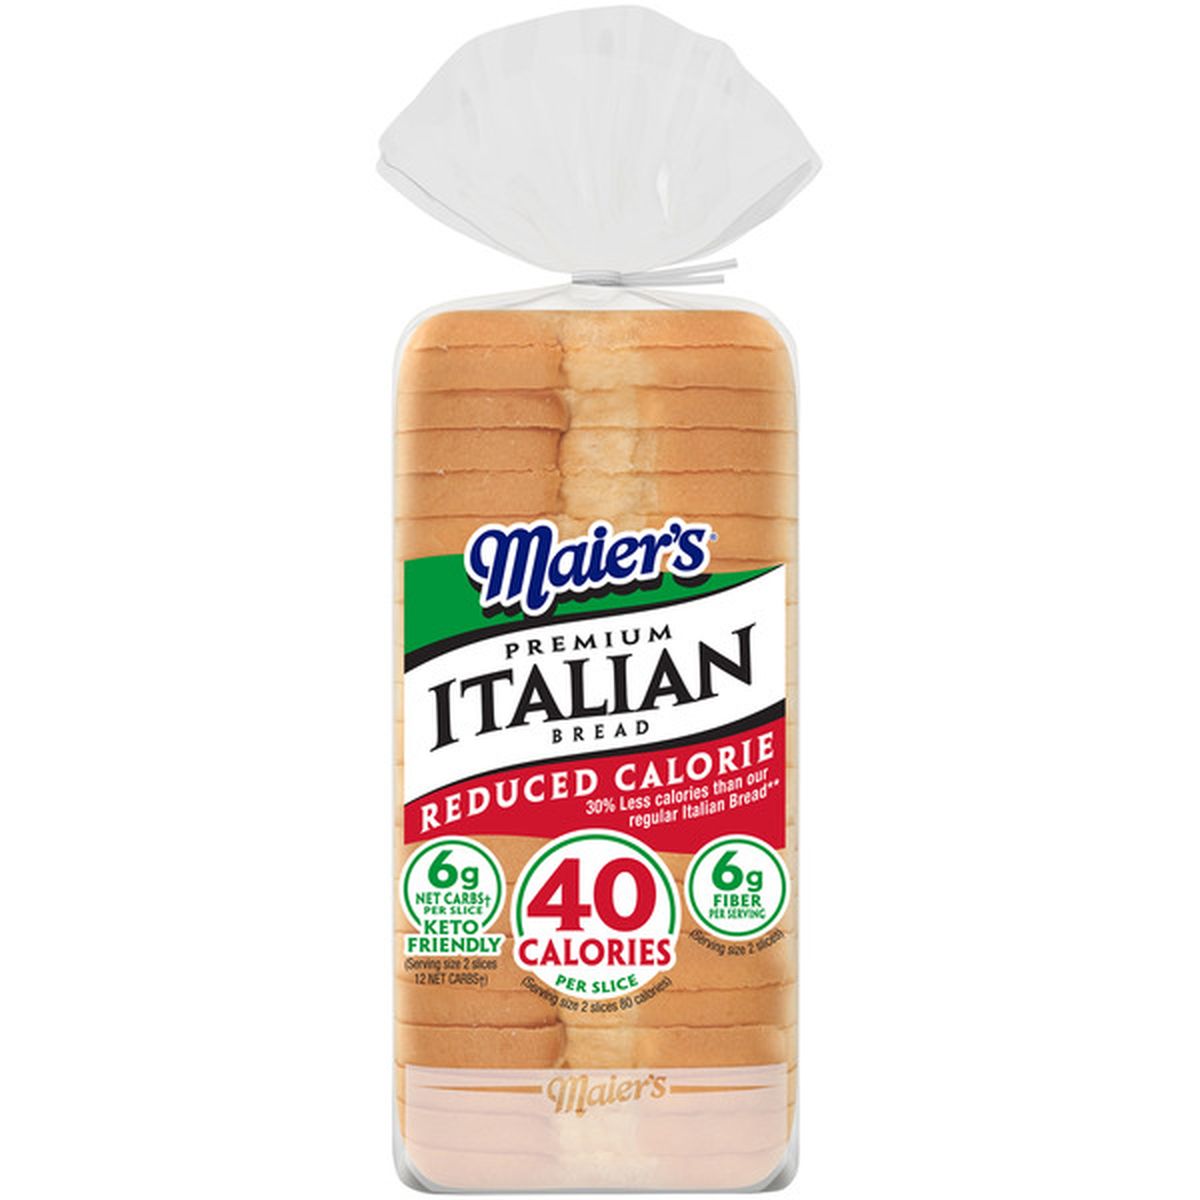 Calories in Maier's Unseeded Italian Bread with Reduced Calories